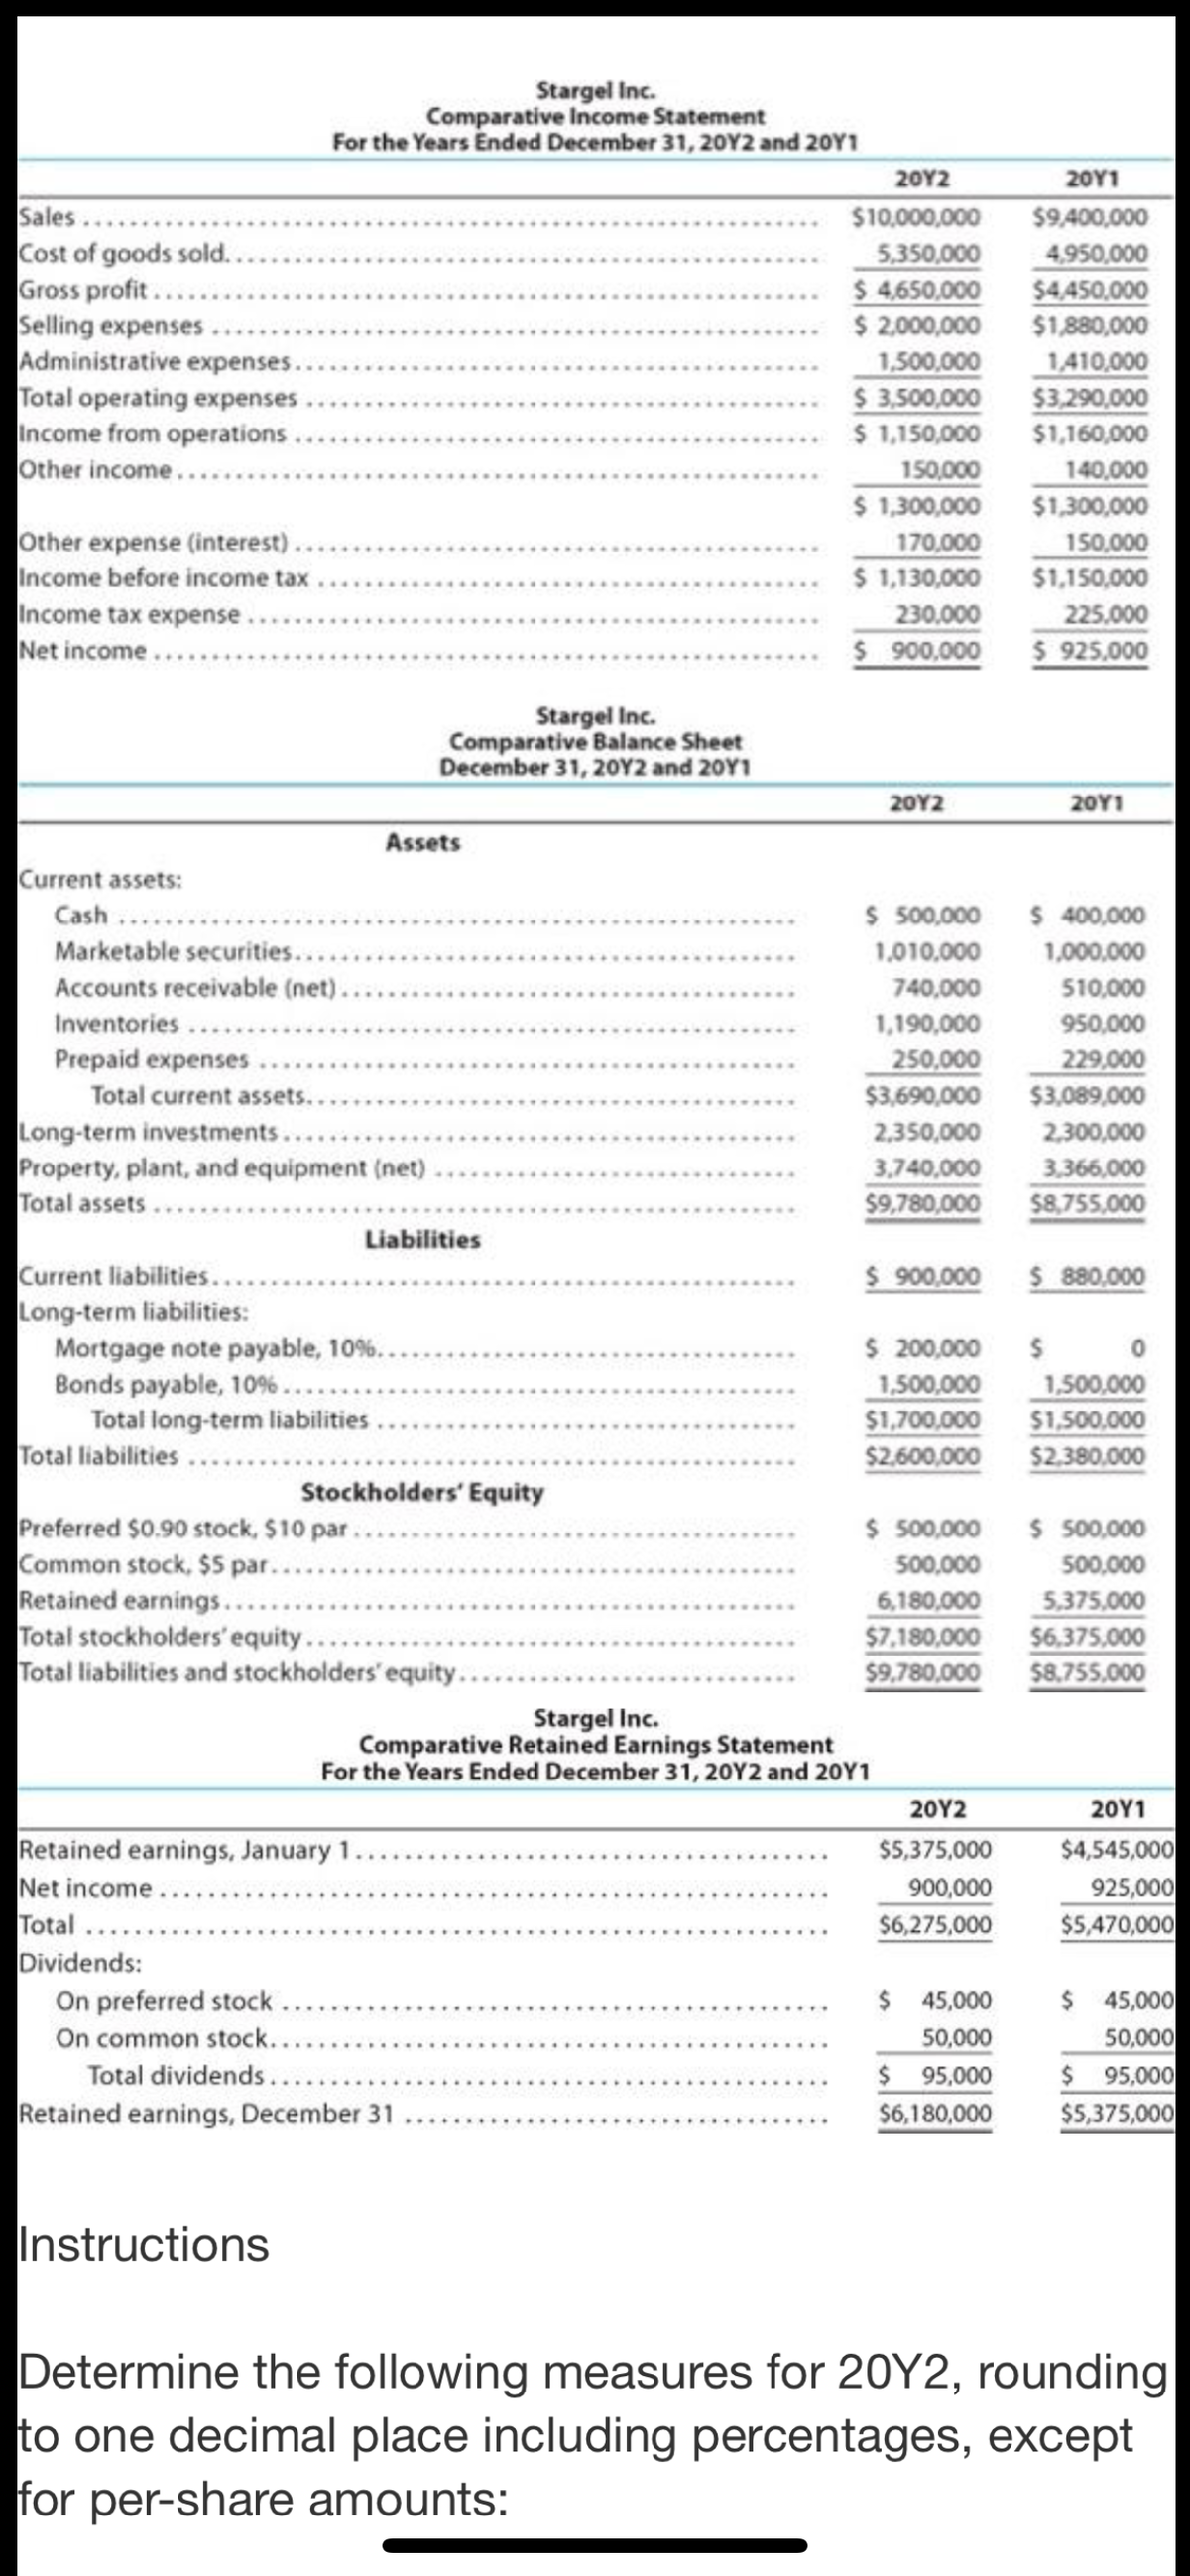 Stargel Inc.
Comparative Income Statement
For the Years Ended December 31, 20Y2 and 20Y1
20Υ2
20Υ1
Sales ..
Cost of goods sold..
Gross profit ..
Selling expenses
Administrative expenses.
Total operating expenses
Income from operations.
Other income.
$10,000,000
$9,400,000
4,950,000
$4450,000
$1,880,000
5,350,000
$ 4,650,000
$ 2,000,000
1,500,000
$ 3,500,000
$ 1,150,000
150,000
$ 1,300,000
170,000
$ 1,130,000
1,410,000
$3,290,000
$1,160,000
140,000
$1,300,000
Other expense (interest)...
Income before income tax
Income tax expense.
Net income....
150,000
$1,150,000
225,000
$ 925,000
230,000
$ 900,000
Stargel Inc.
Comparative Balance Sheet
December 31, 20Y2 and 20Y1
20Y2
20Υ1
Assets
Current assets:
Cash
$ 500,000
$ 400,000
Marketable securities...
1,010,000
1,000,000
Accounts receivable (net).
740,000
510,000
Inventories.
1,190,000
950,000
Prepaid expenses
Total current assets..
Long-term investments..
Property, plant, and equipment (net)
Total assets..
250,000
229.000
$3,089,000
$3,690,000
2,350,000
2,300,000
3,740,000
$9,780,000
3.366,000
$8,755,000
Liabilities
Current liabilities...
Long-term liabilities:
Mortgage note payable, 10%...
Bonds payable, 10 %....
Total long-term liabilities .
Total liabilities.
$ 900,000
$ 880,000
$ 200,000
1,500,000
$1,700,000
$2.600,000
1,500,000
$1,500,000
$2.380,000
Stockholders' Equity
Preferred $0.90 stock, $10 par.
Common stock, $5 par....
Retained earnings.....
Total stockholders'equity.....
Total liabilities and stockholders' equity..
$ 500,000
$ 500,000
500,000
500,000
6,180,000
$7,180,000
$9.780,000
5,375,000
$6,375,000
$8.755,000
Stargel Inc.
Comparative Retained Earnings Statement
For the Years Ended December 31, 20Y2 and 20Y1
20Υ2
20Υ1
Retained earnings, January 1...
Net income..
Total
Dividends:
On preferred stock
On common stock..
Total dividends....
Retained earnings, December 31
$4,545,000
925,000
$5,470,000
$5,375,000
900,000
$6,275,000
$ 45,000
$ 45,000
50,000
$ 95,000
$6,180,000
50,000
$95,000
$5,375,000
Instructions
Determine the following measures for 20Y2, rounding
to one decimal place including percentages, except
for per-share amounts:
